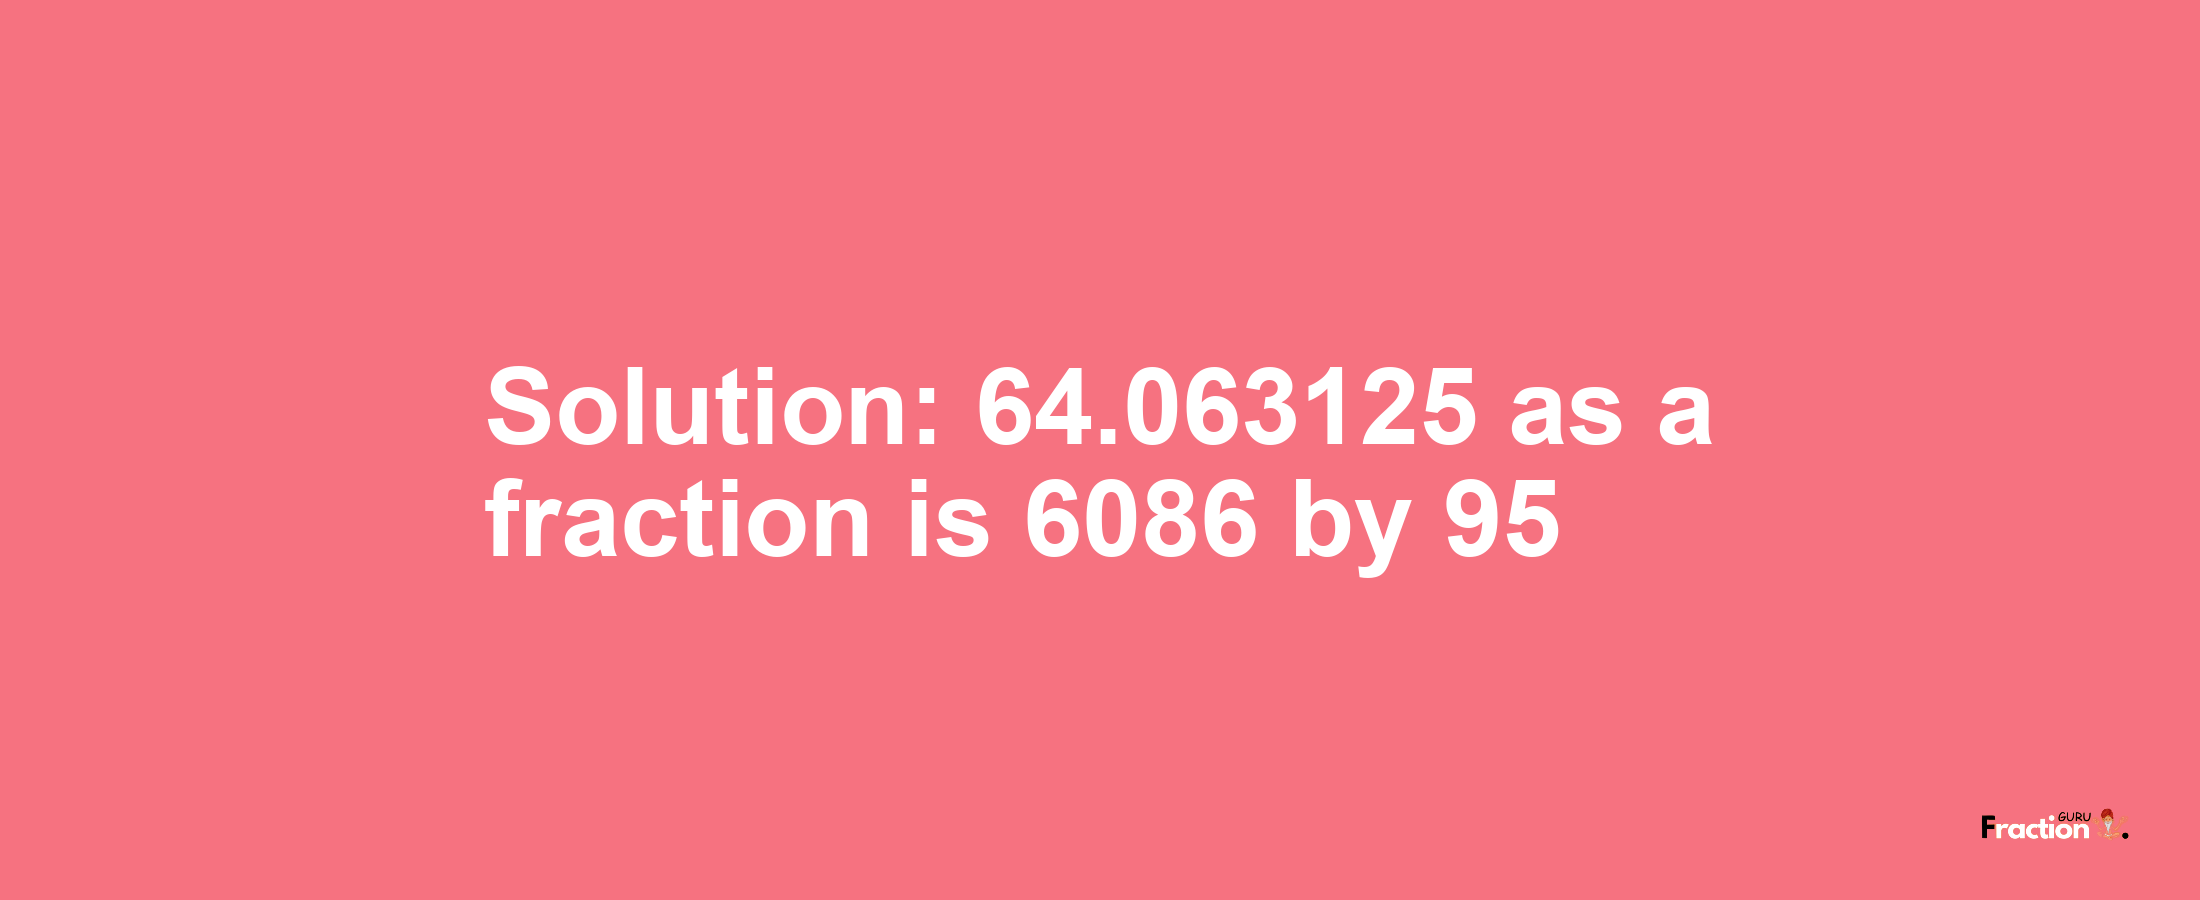 Solution:64.063125 as a fraction is 6086/95